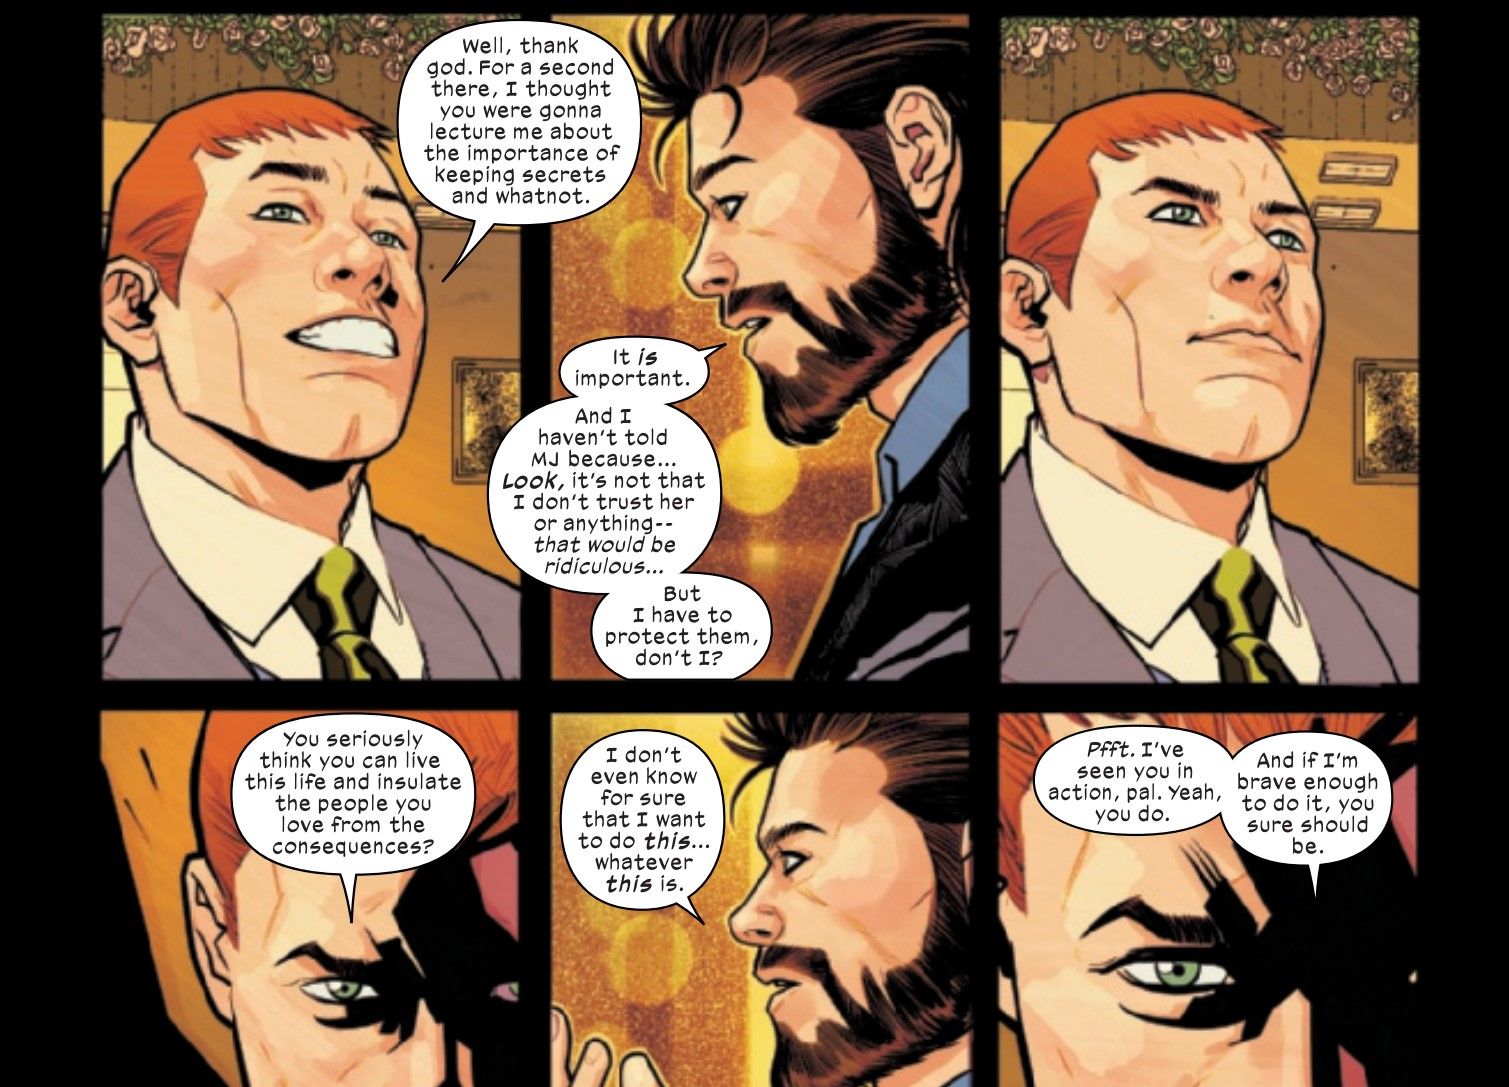 Harry Osborn wants Peter Parker to tell MJ about his secret identity in Ultimate Spider-Man #4